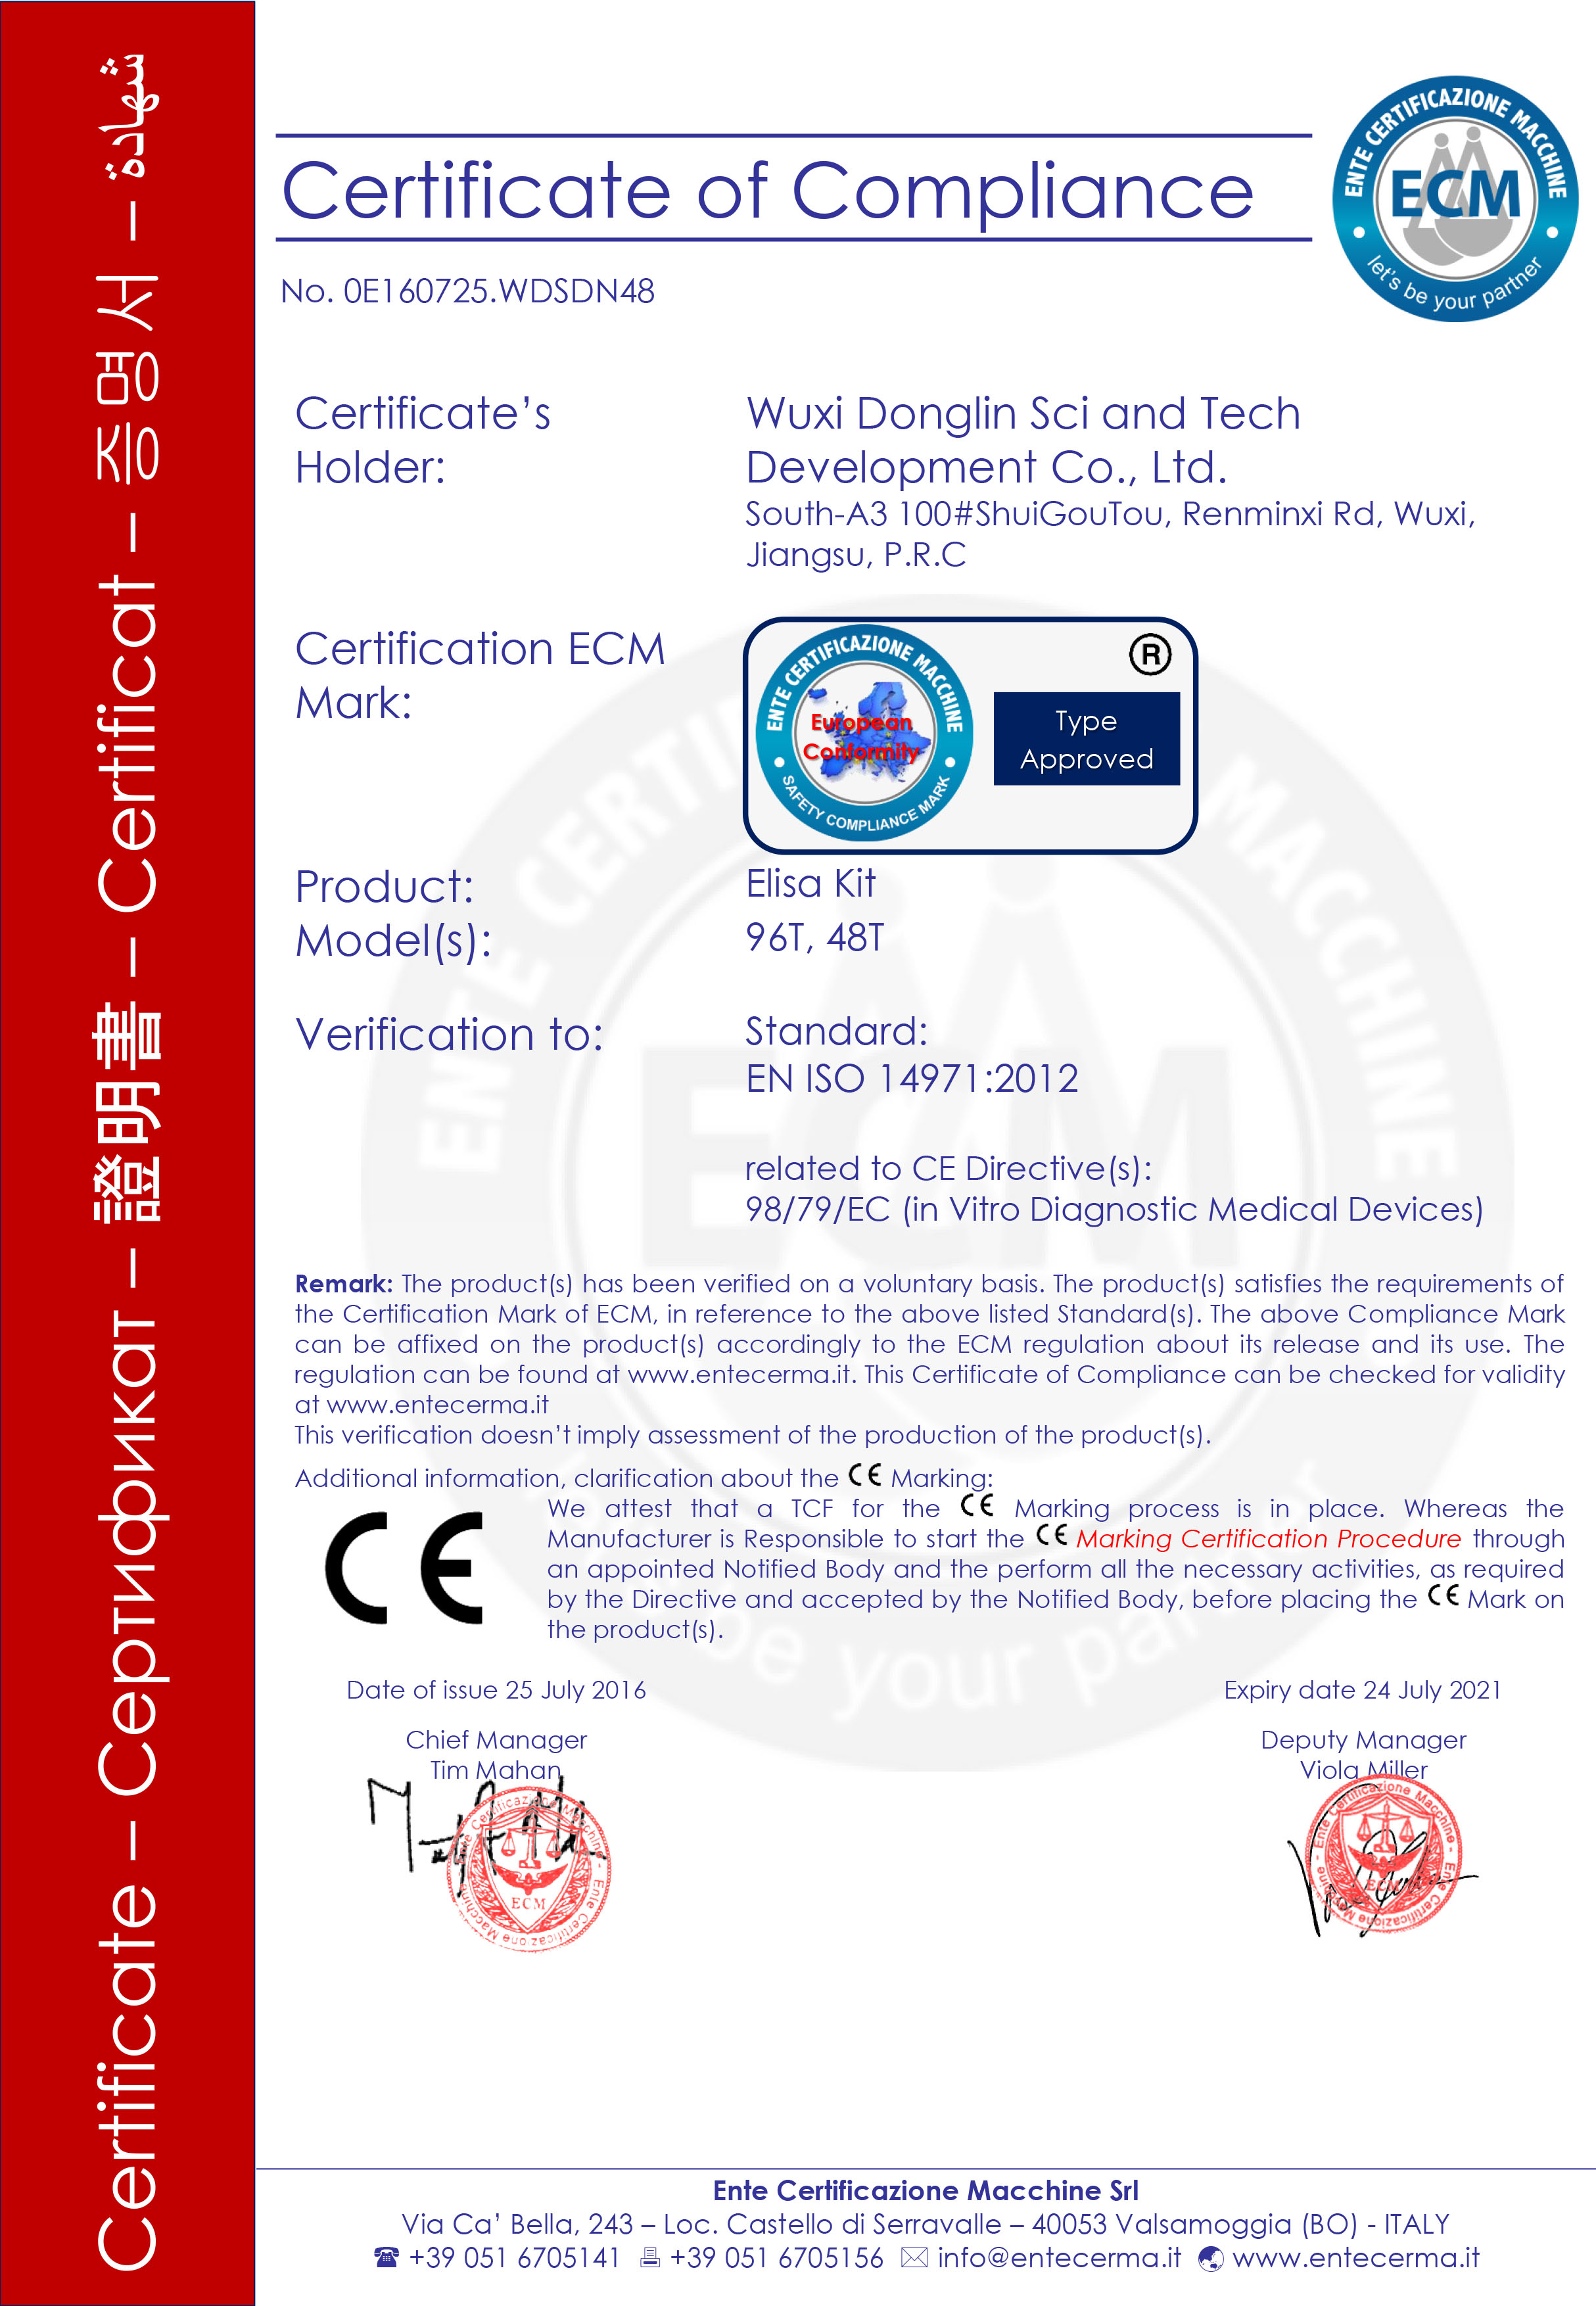 DLDEVELOP has been certified with ISO9001:2008 and Certificate of Compliance standard